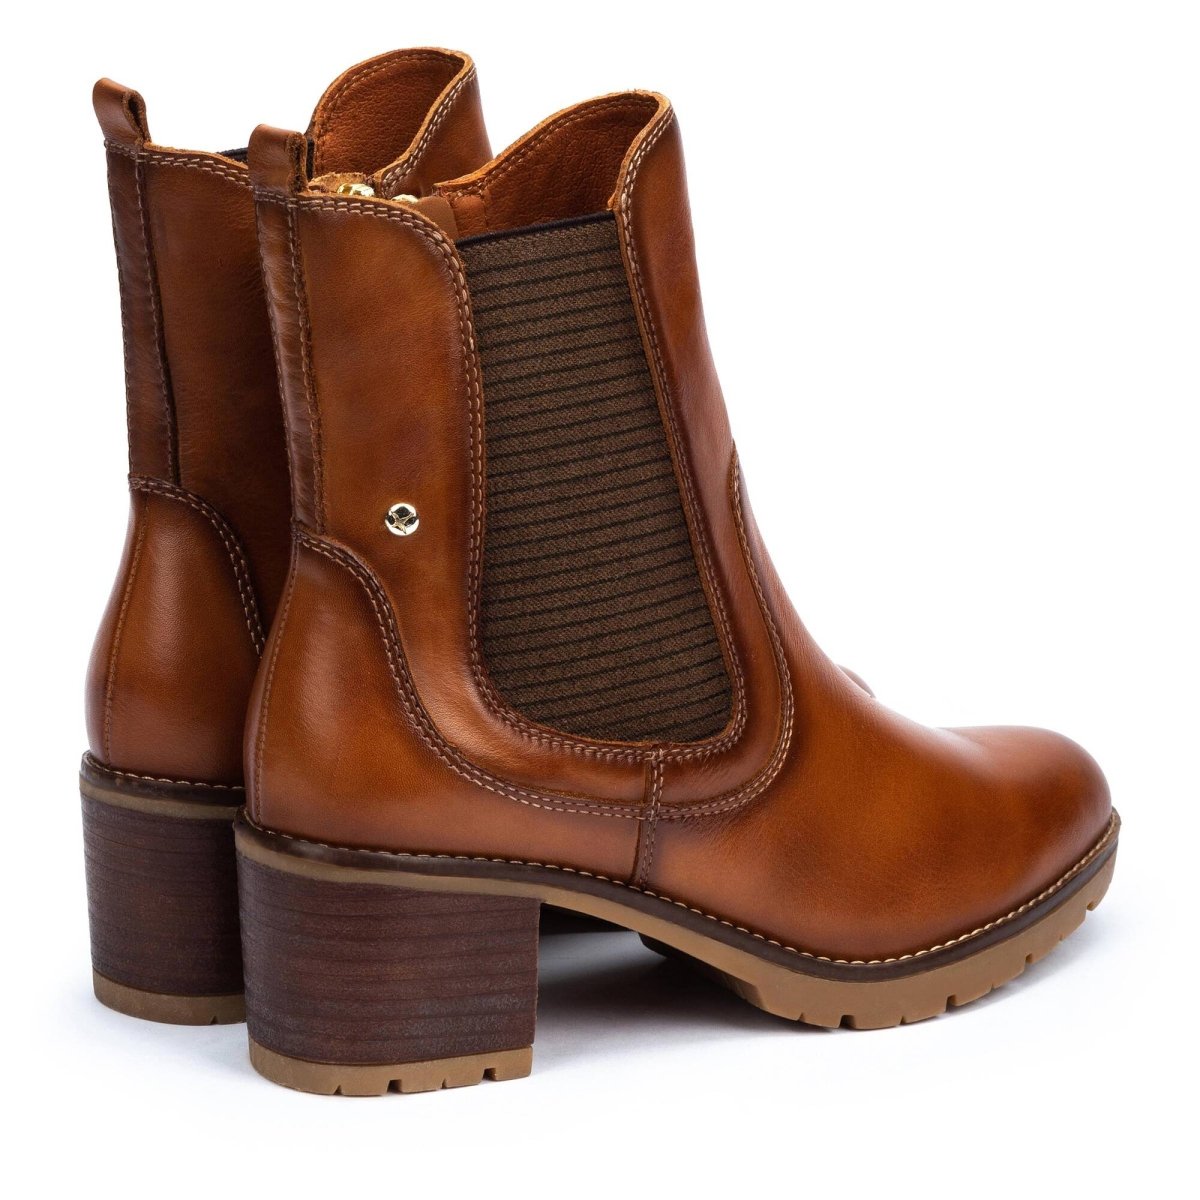 PIKOLINOS LLANES W7H-8948 WOMEN'S ANKLE BOOTS IN BRANDY - TLW Shoes